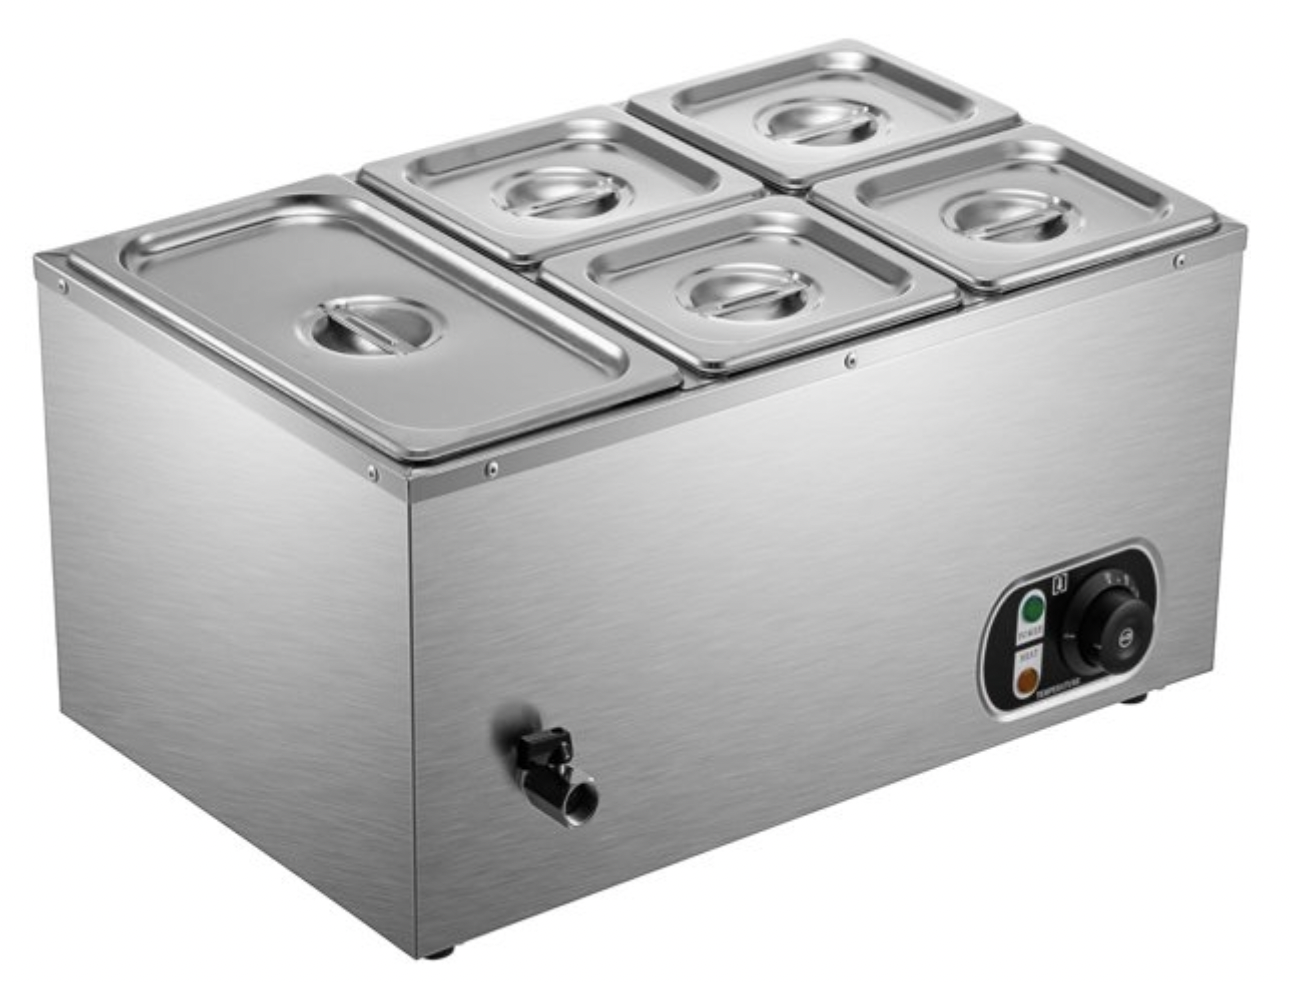 VEVOR 110V Commercial Food Warmer Spasm price 1x1 and 6GN 3GN 4x1 Sta 5-Pan Portland Mall